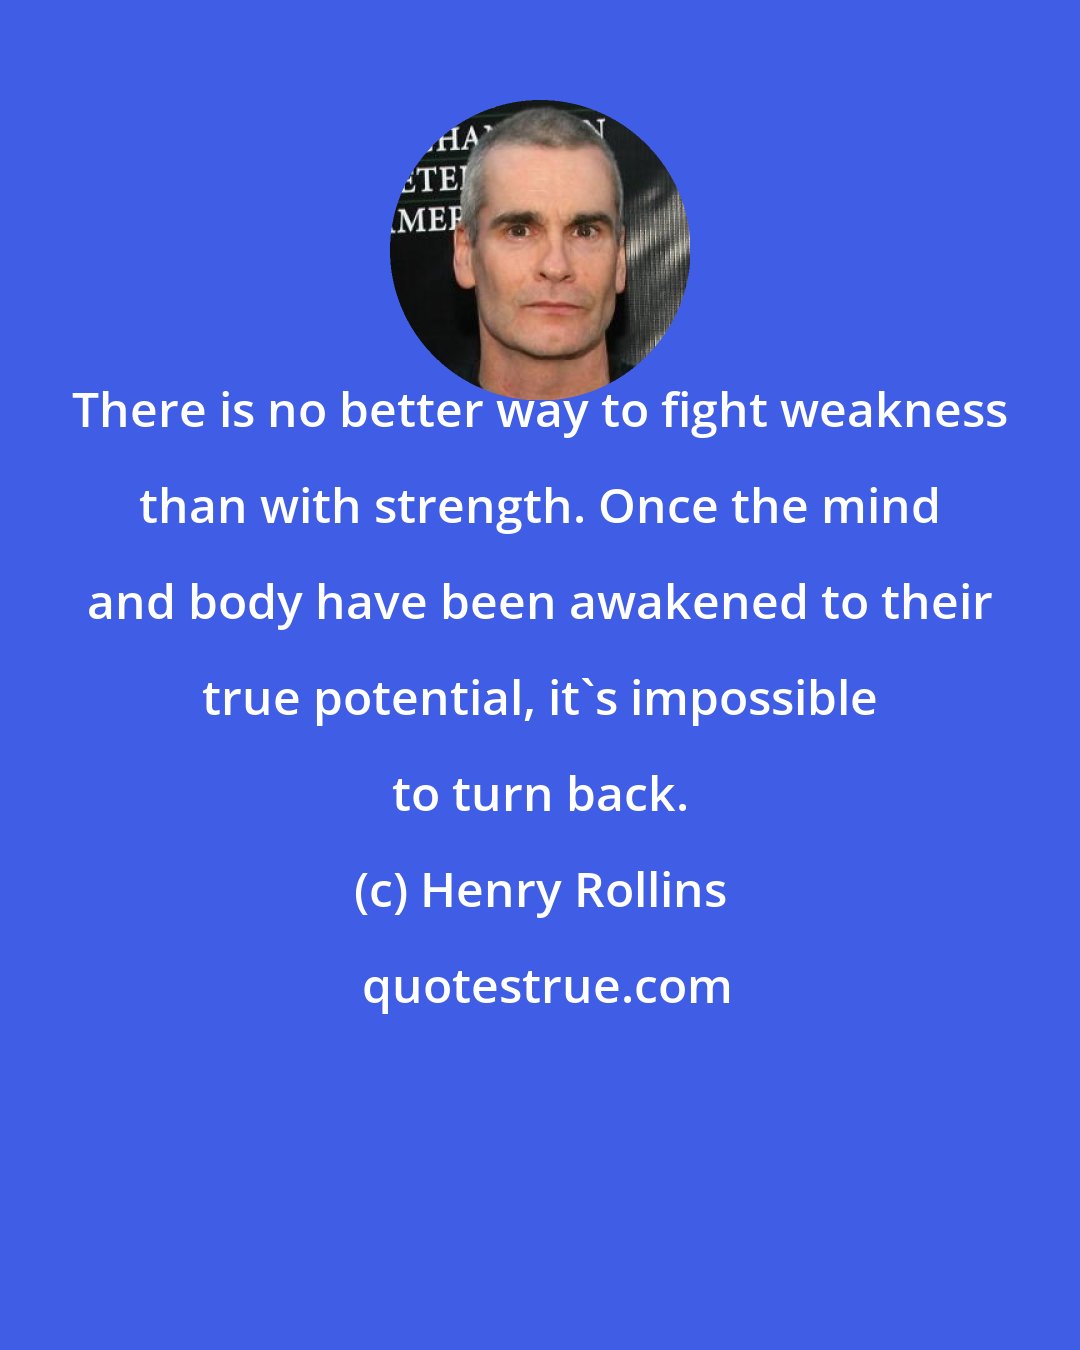 Henry Rollins: There is no better way to fight weakness than with strength. Once the mind and body have been awakened to their true potential, it's impossible to turn back.